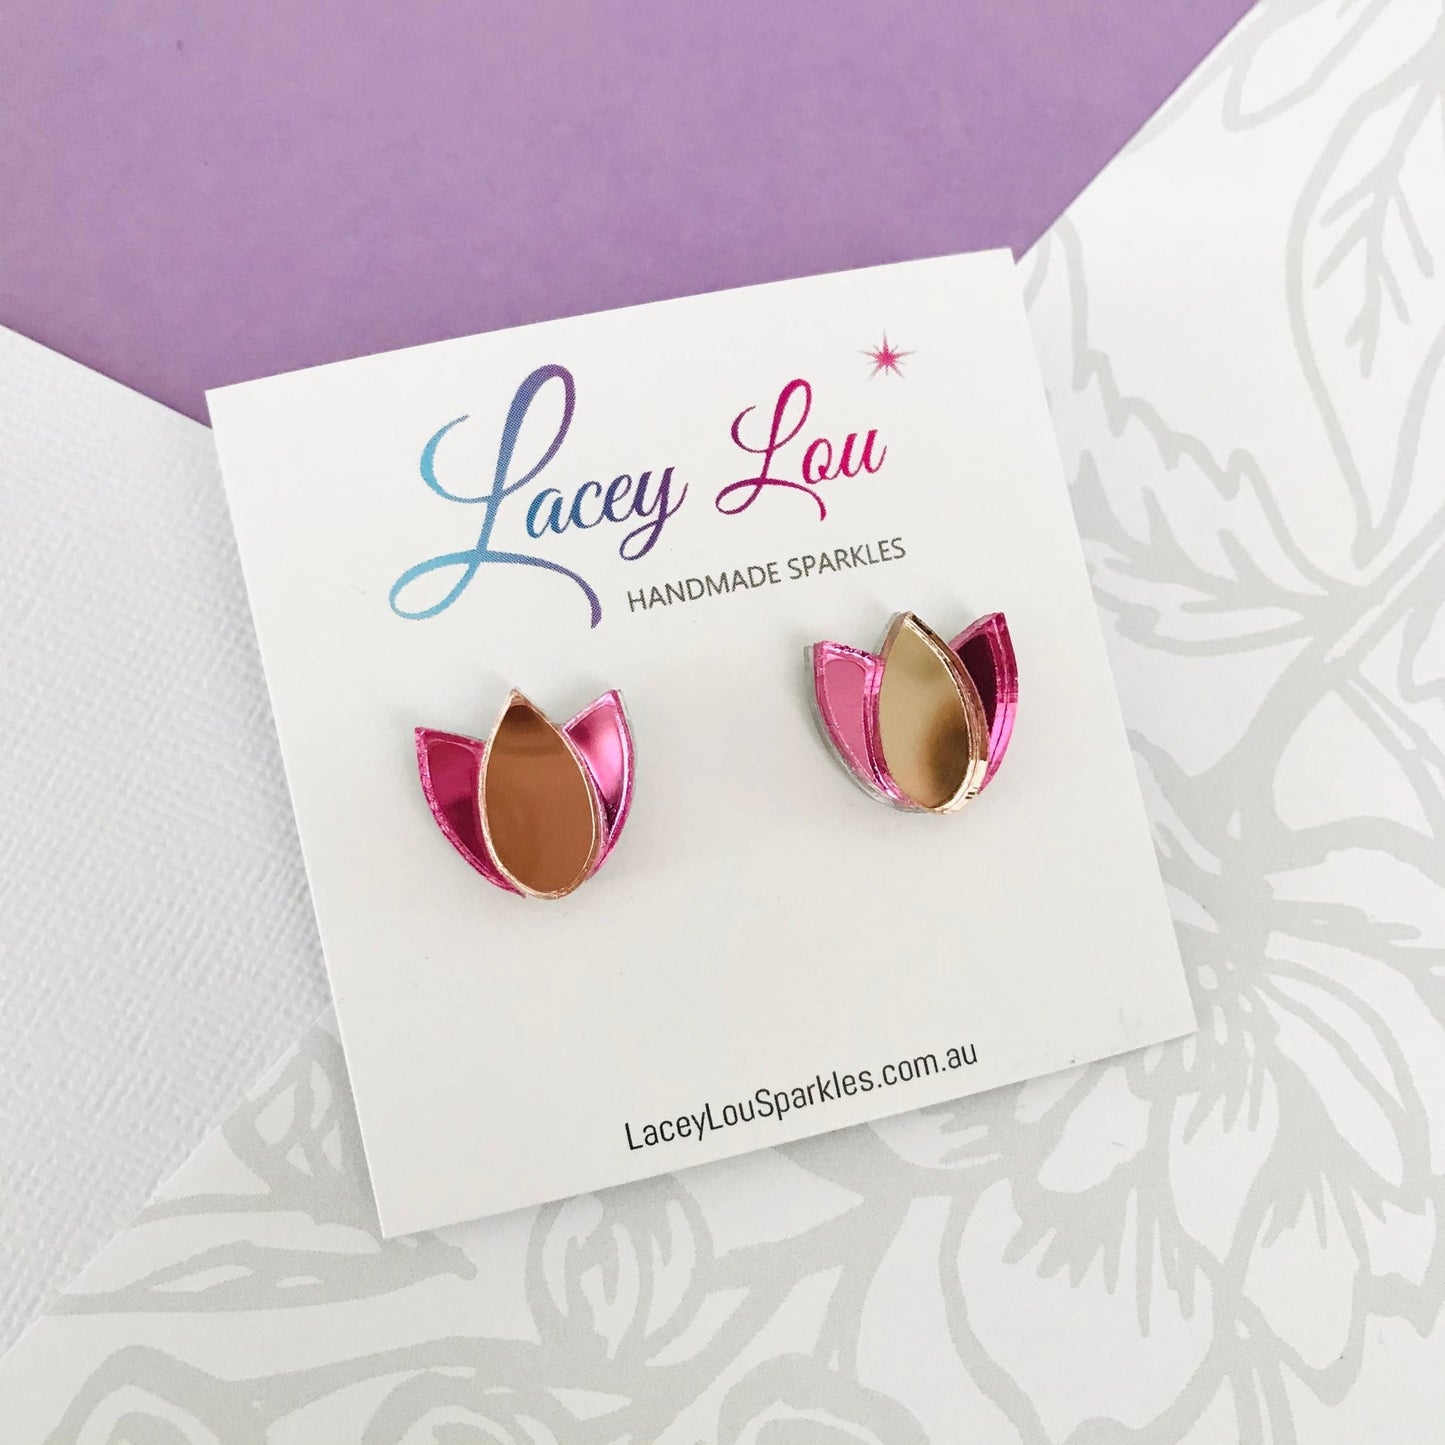 Tulip Earrings - Pink and Rose Gold - Lacey Lou Sparkles